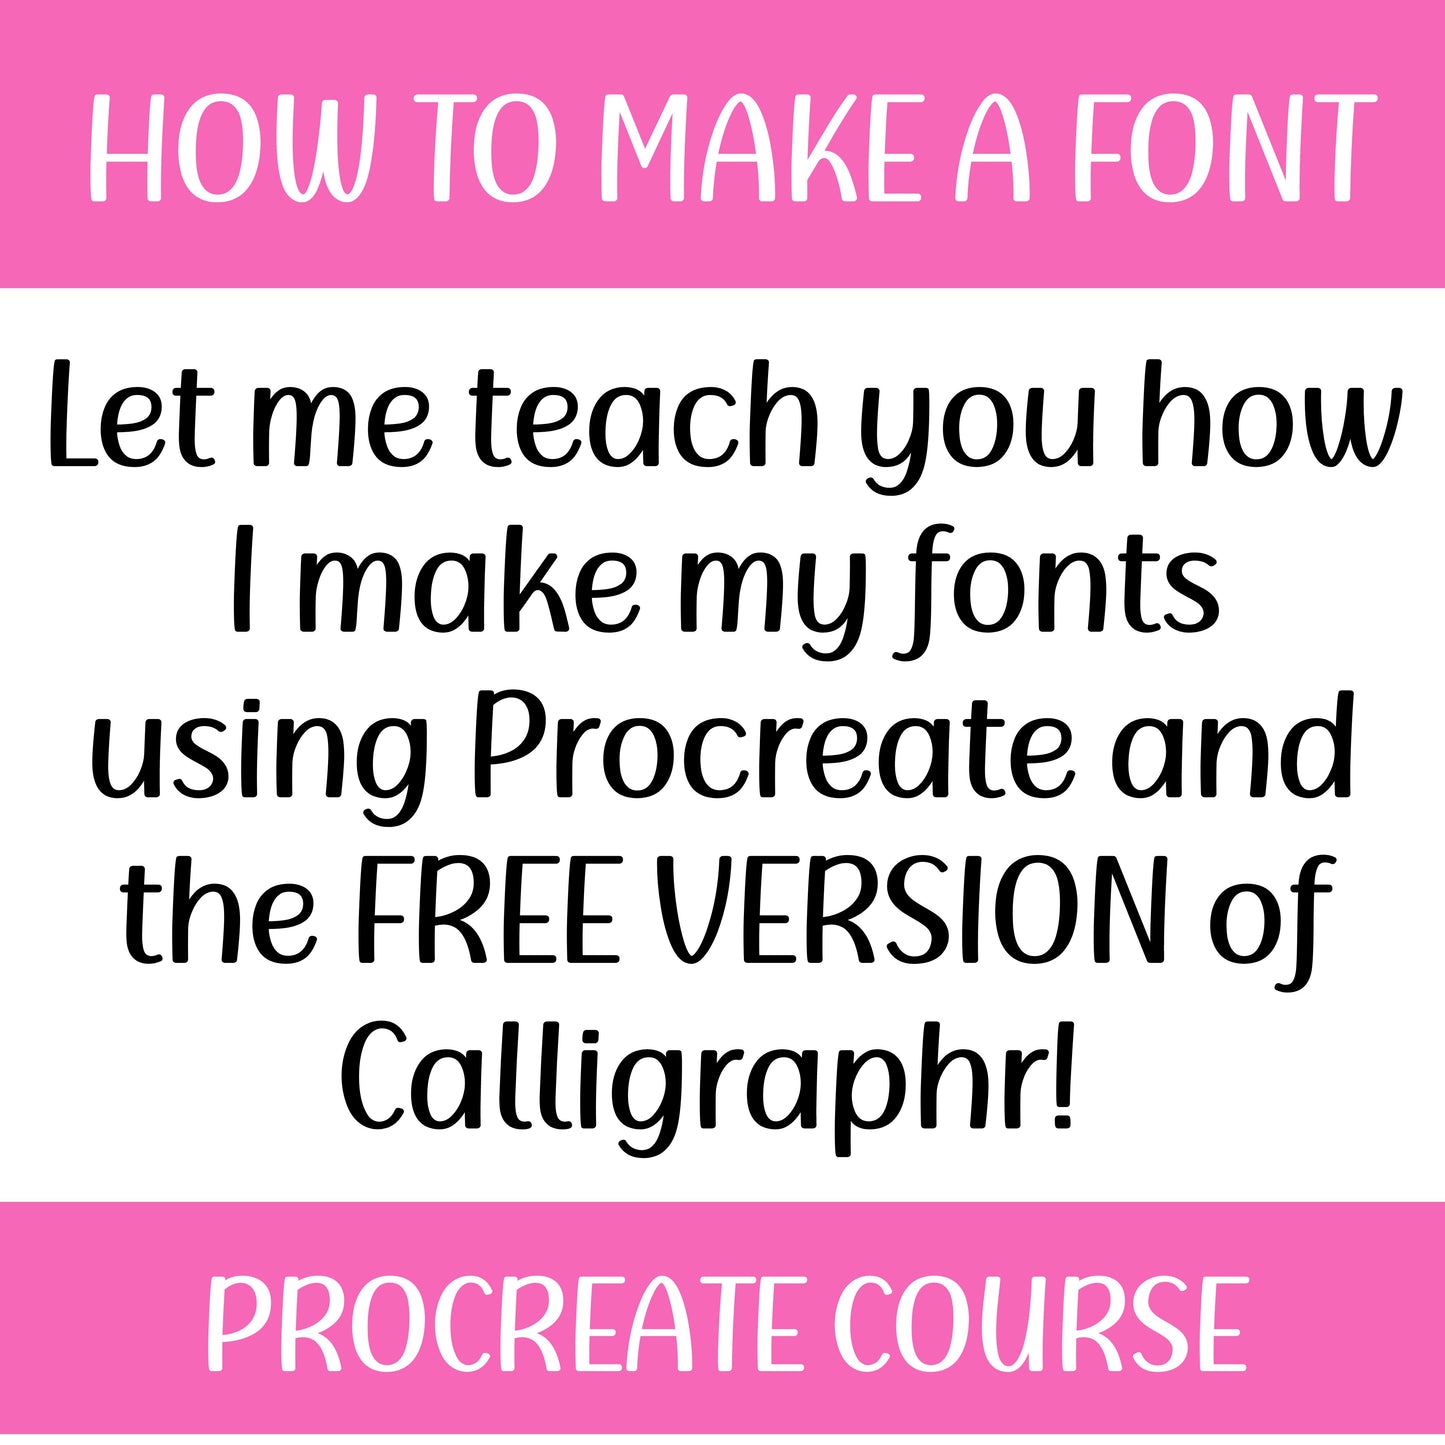 HOW TO MAKE A FONT PROCREATE COURSE